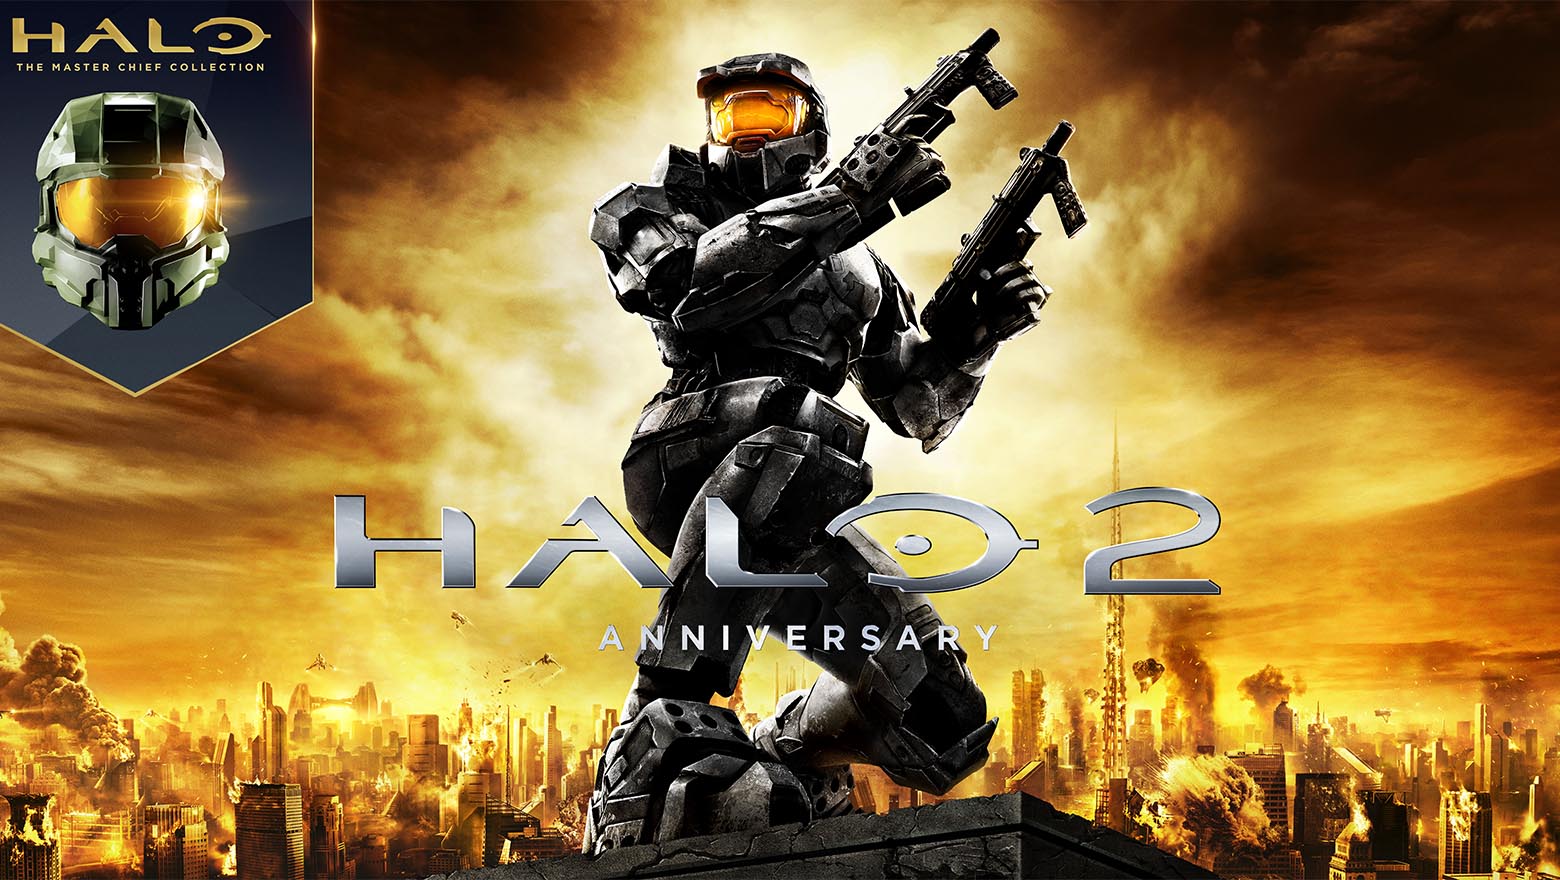 Halo 2 Anniversary (The Master Chief Collection) Review GamersRD